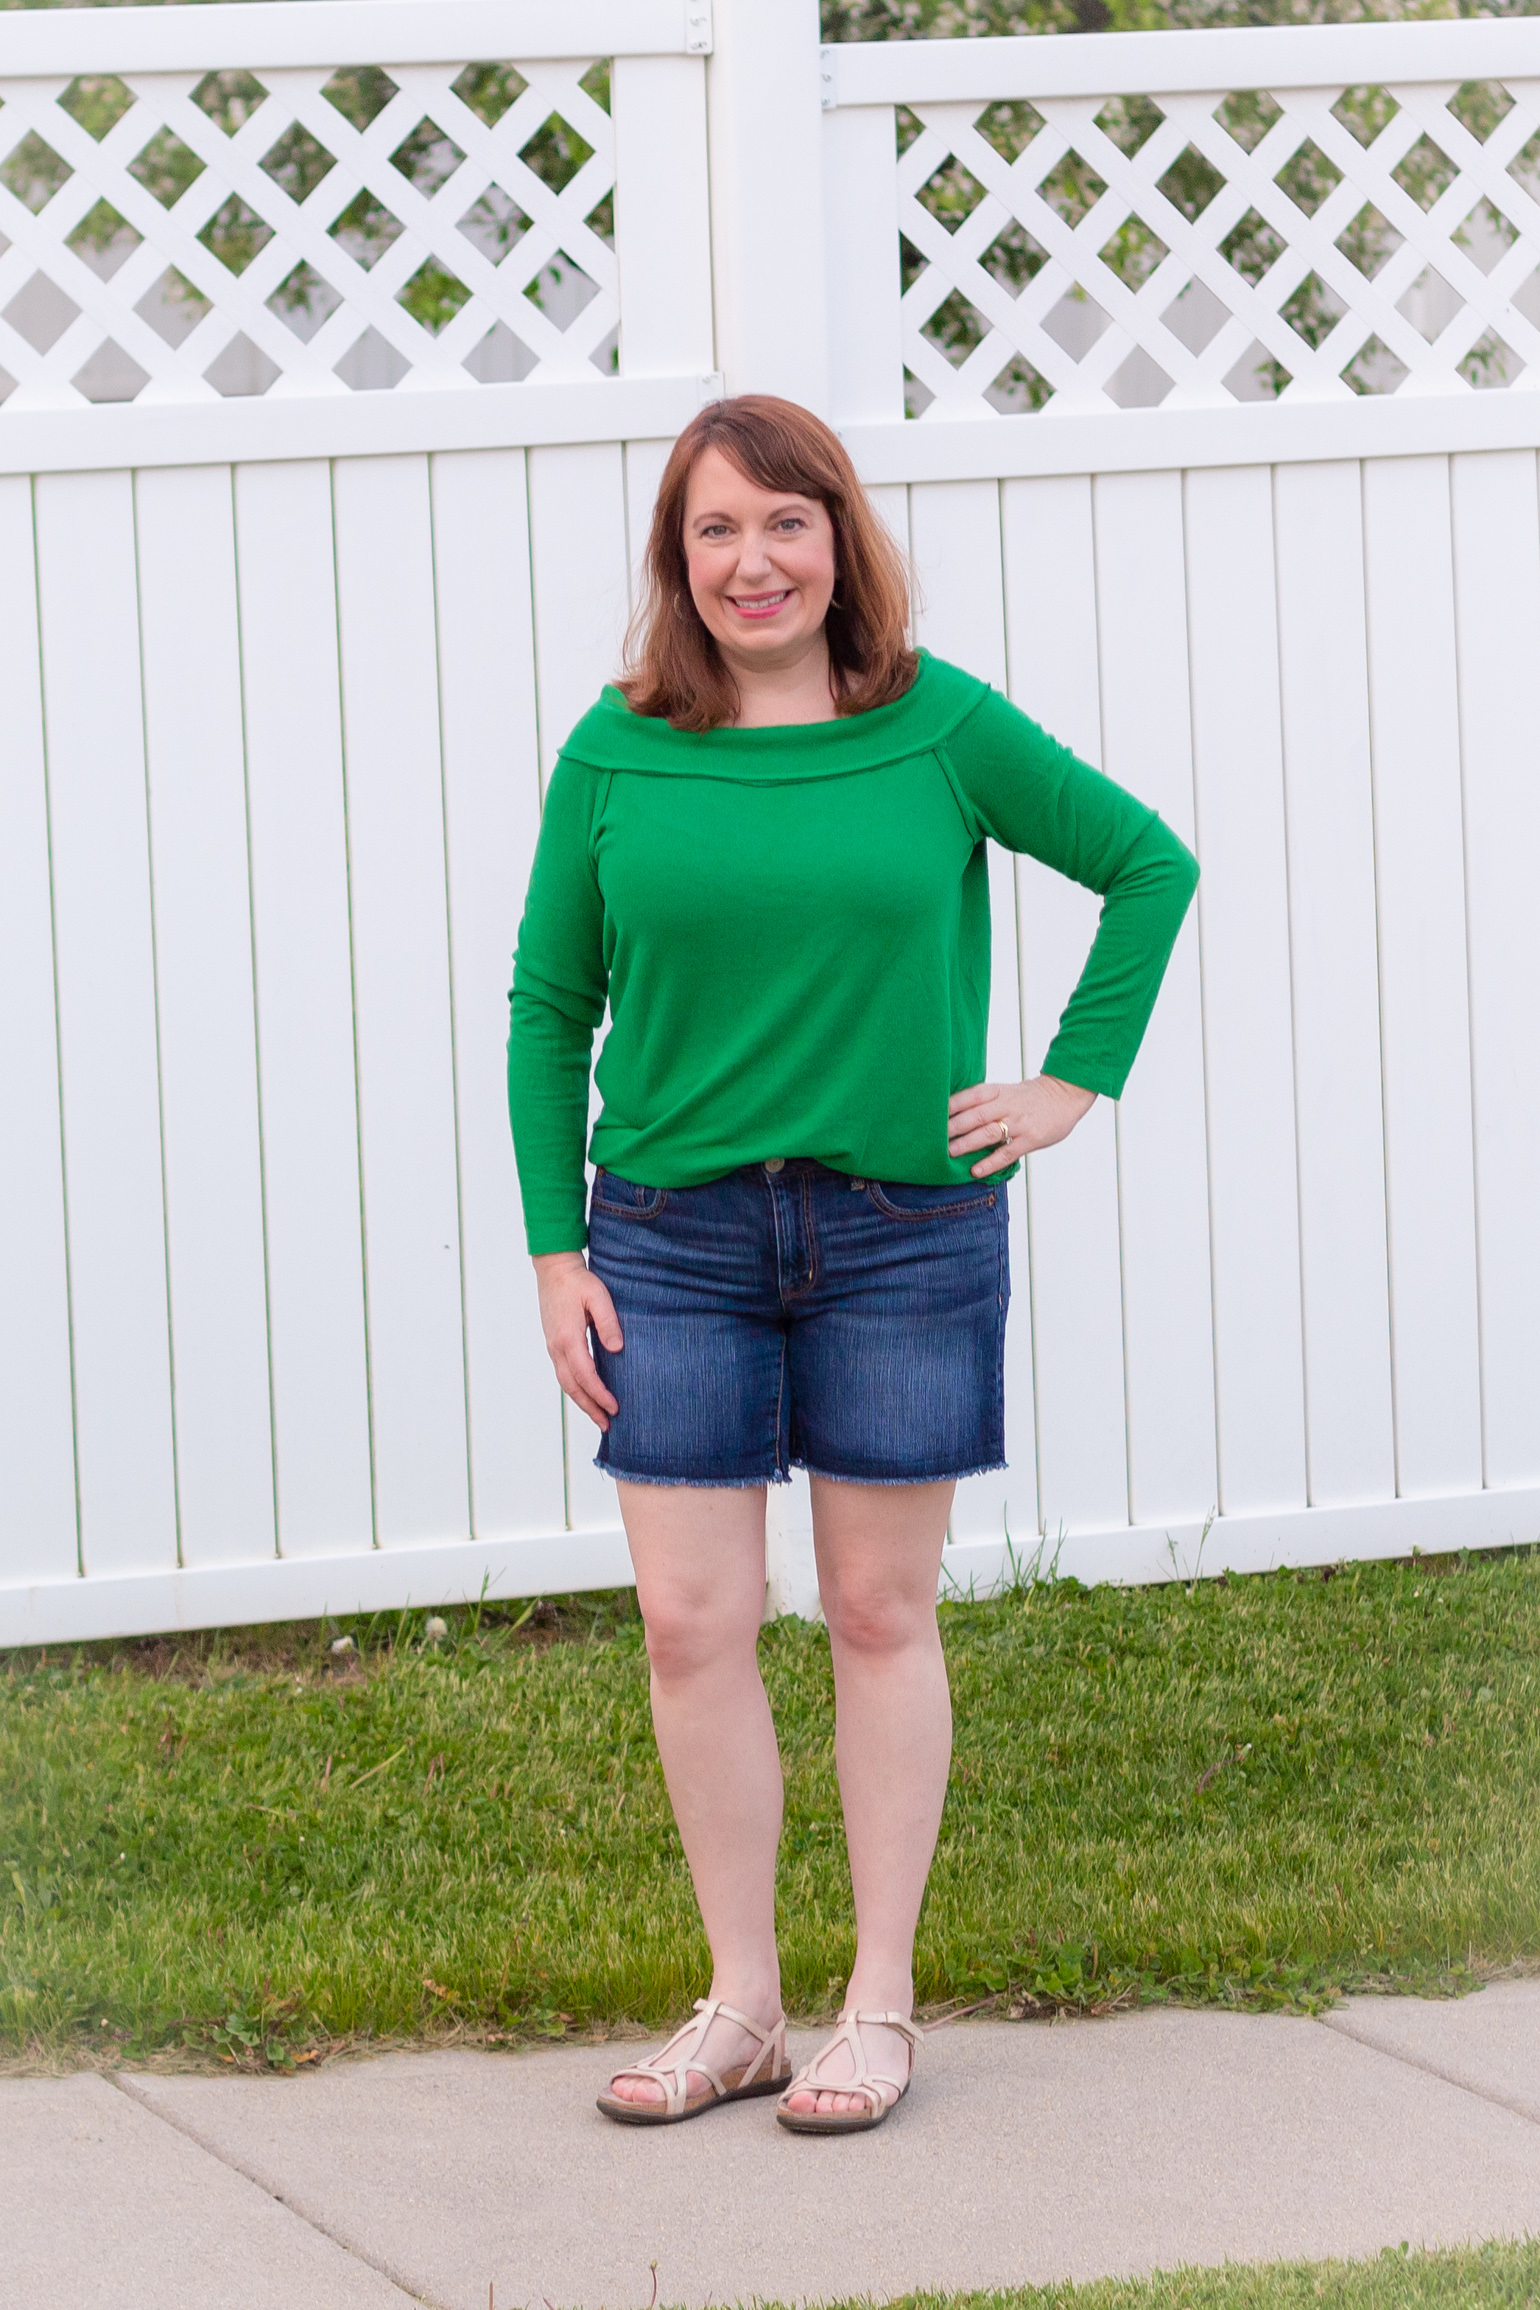 Jean Shorts Outfit for a Cool Day – Dressed in Faith